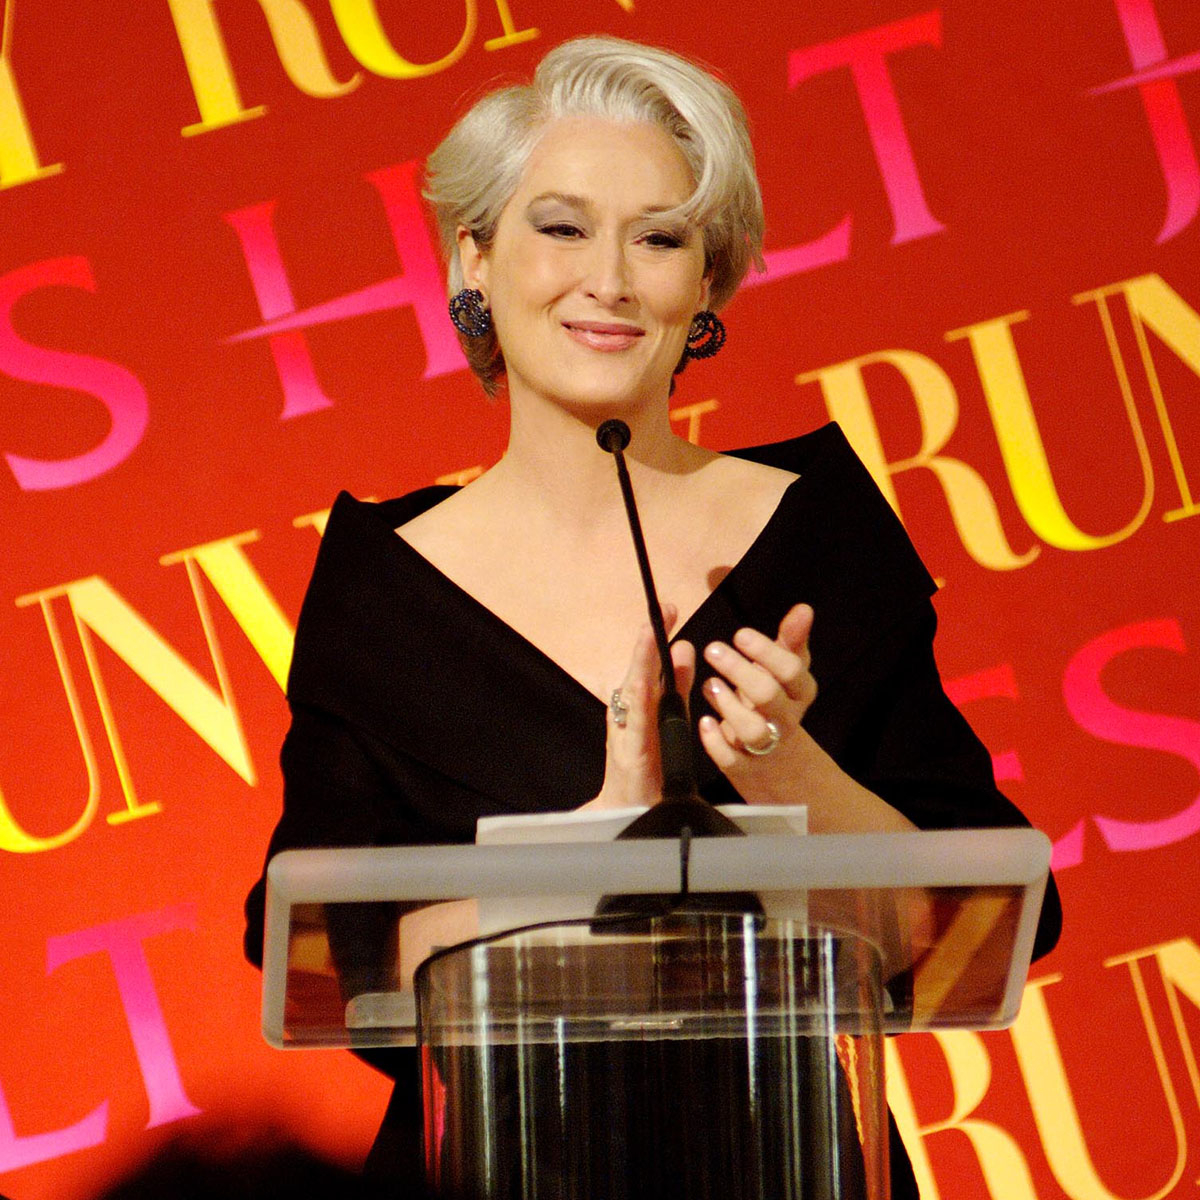 That’s Not Even Her Real Name: 70 Fascinating Facts About Meryl Streep